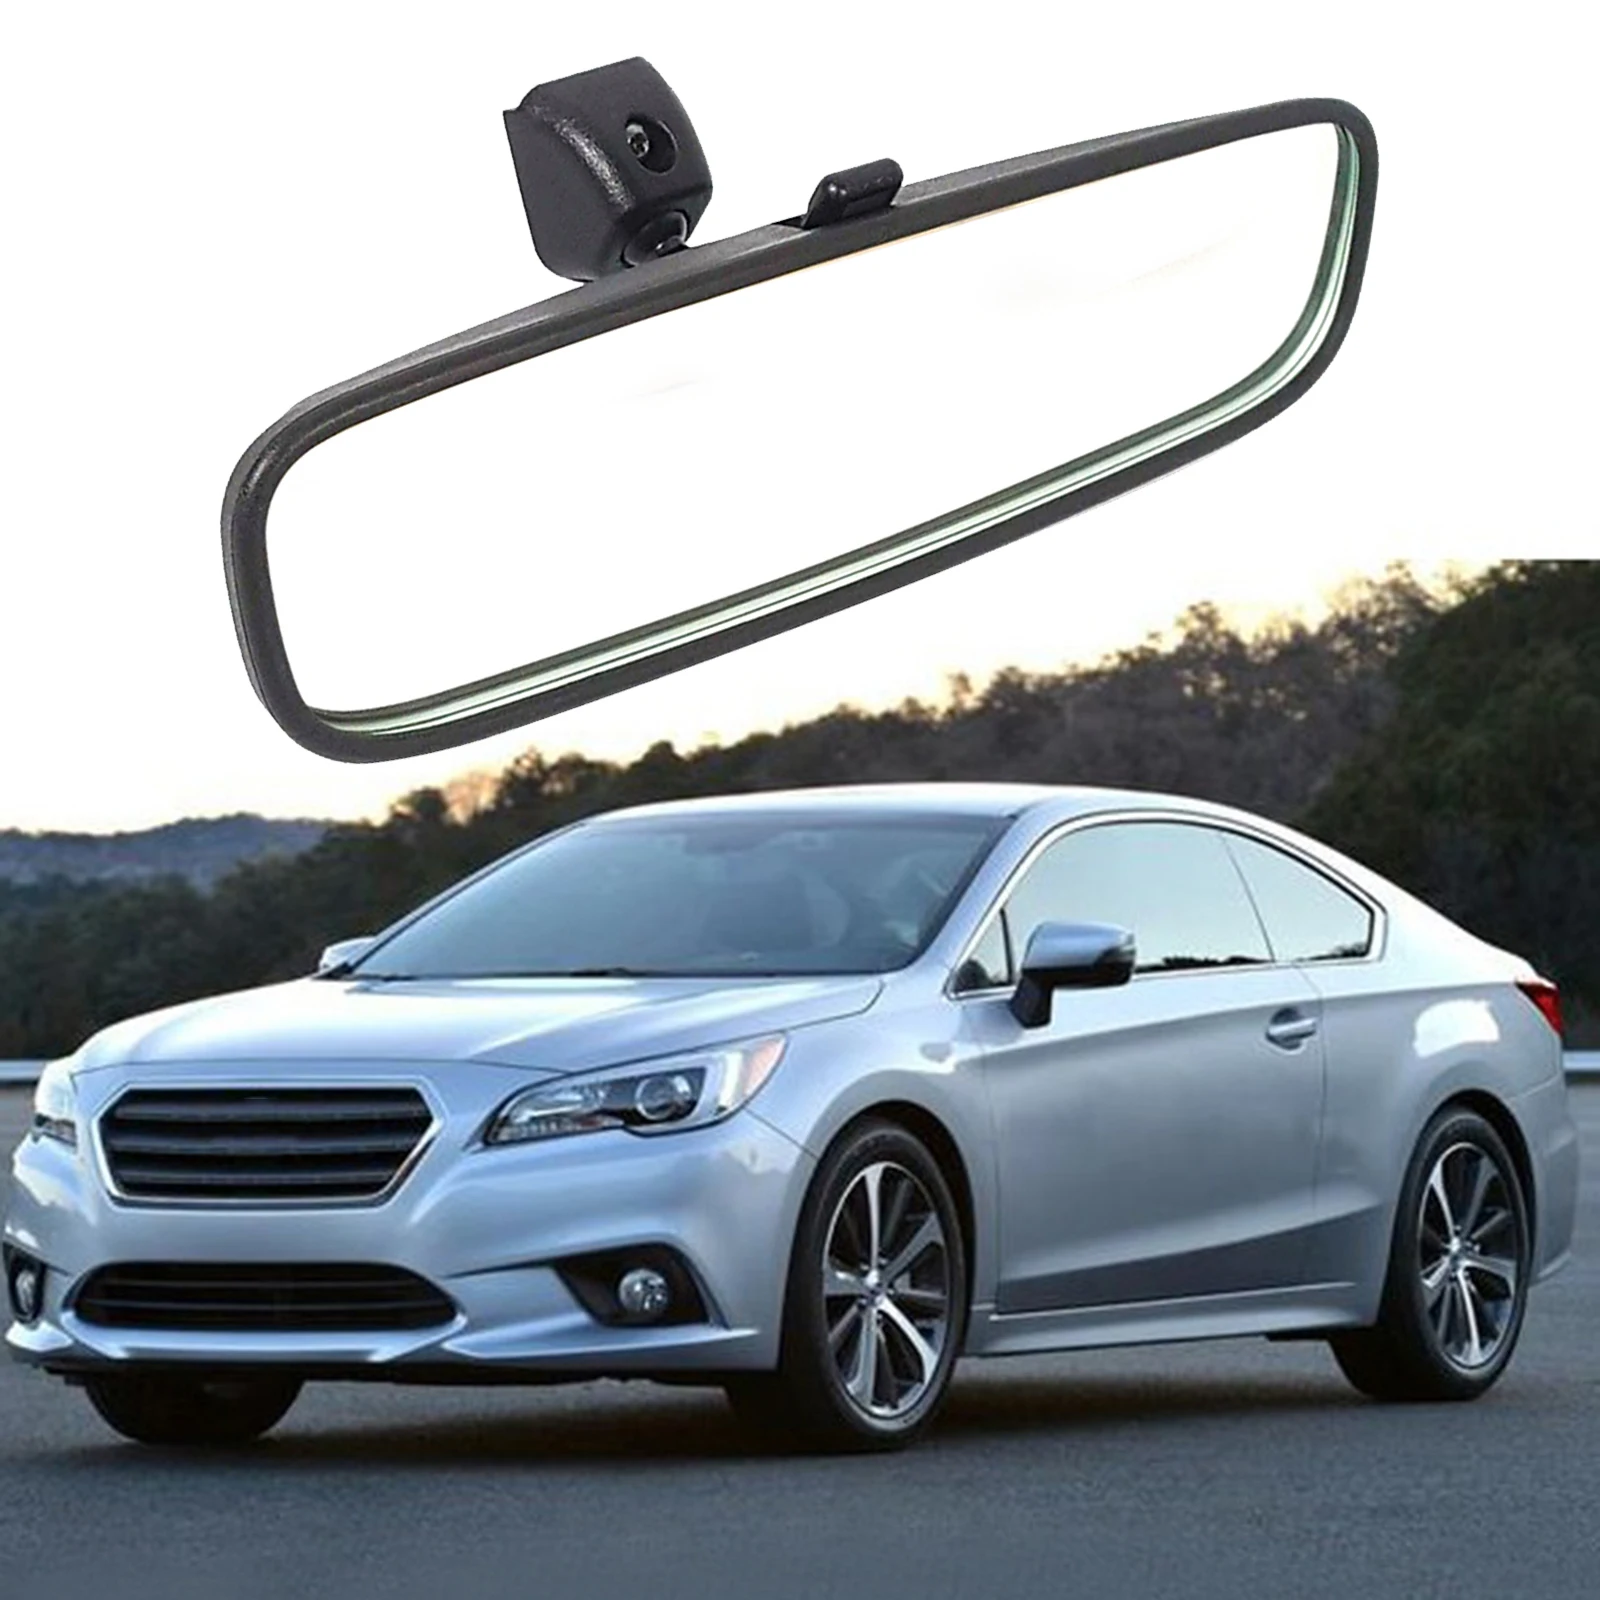 Rear View Mirror 85101-3x100 85101 3x100 for SE Accent GLS